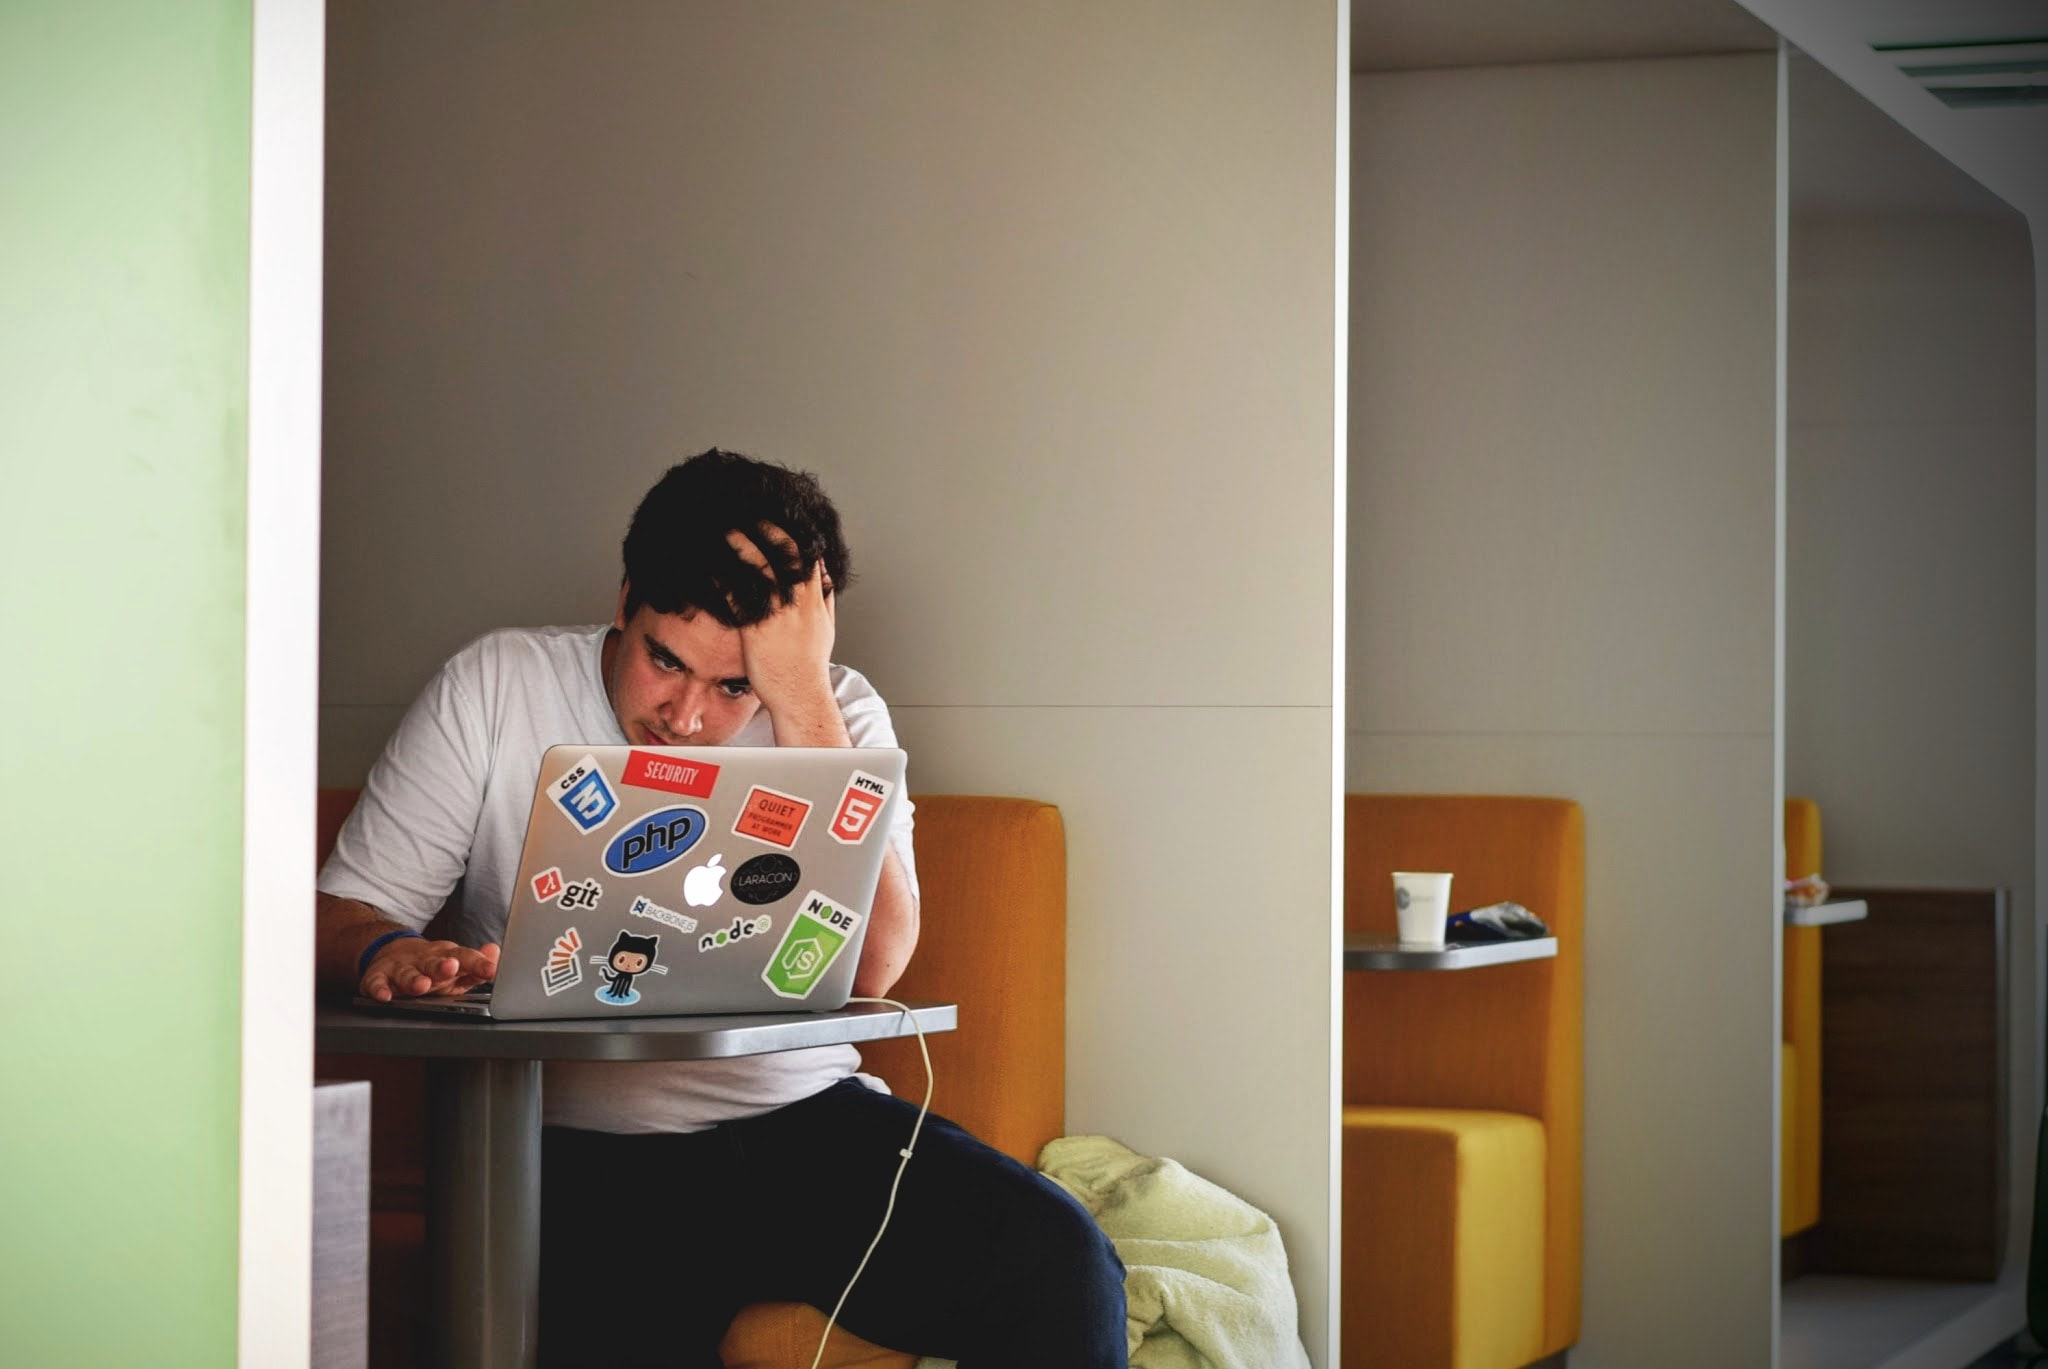 Student studying in a cubicle on a computer